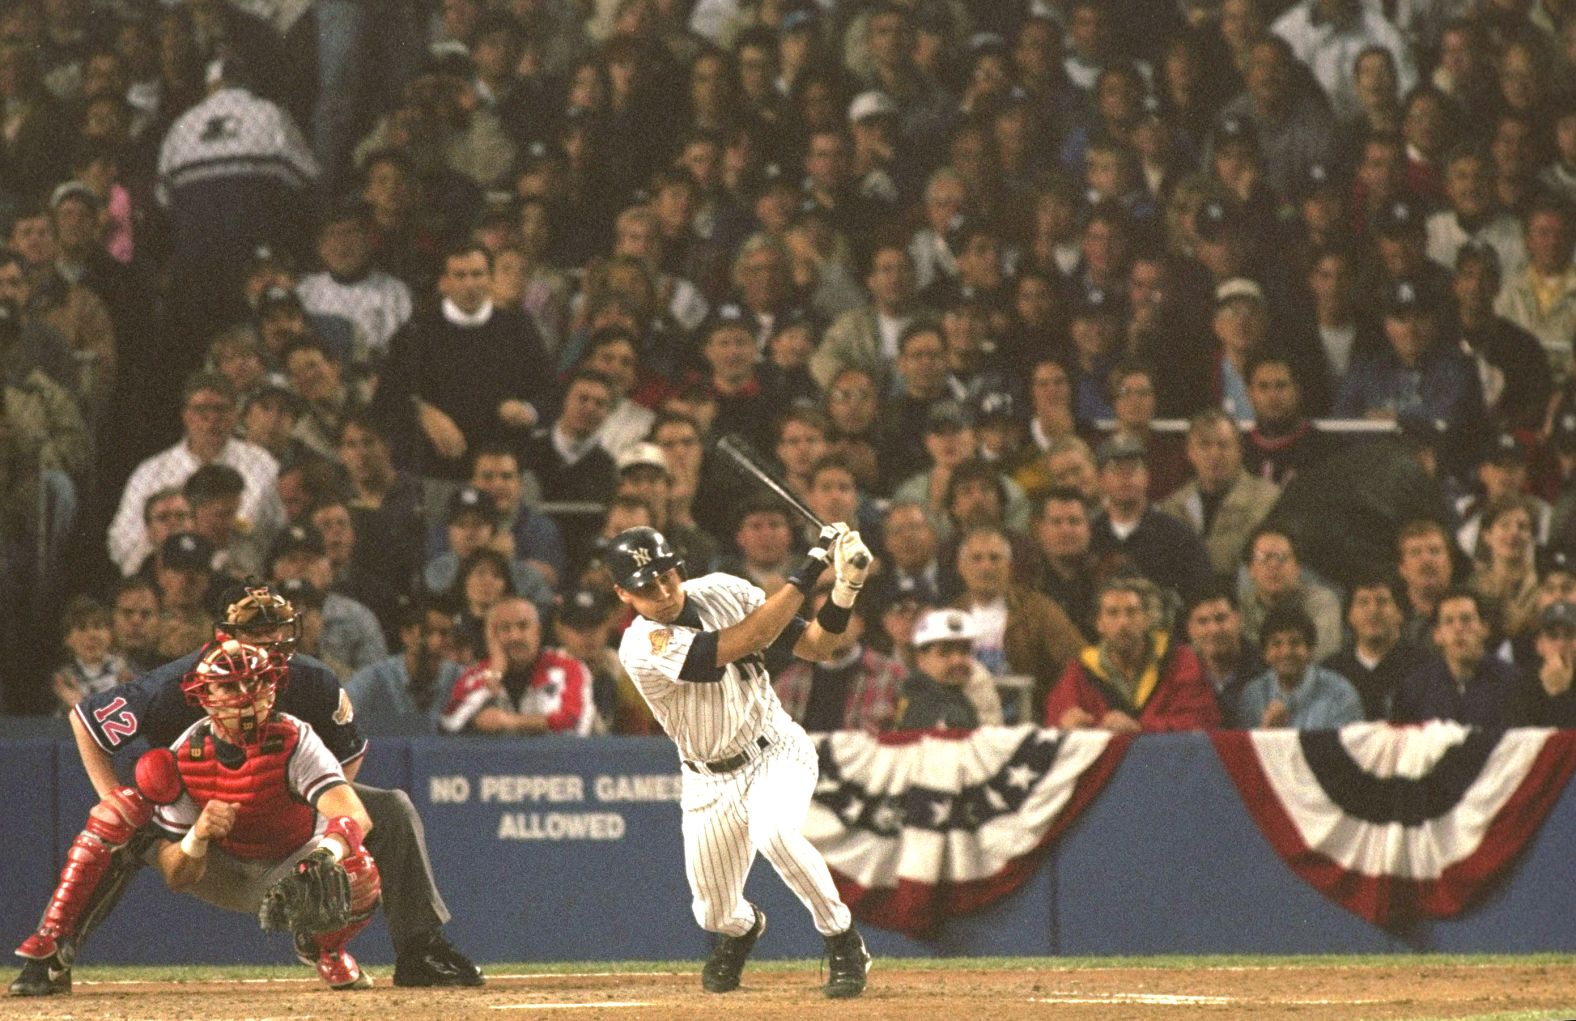 Jeter hits a ball during Game 6 of the World Series in October 1996. The Yankees defeated the Atlanta Braves in Jeter's first full season.